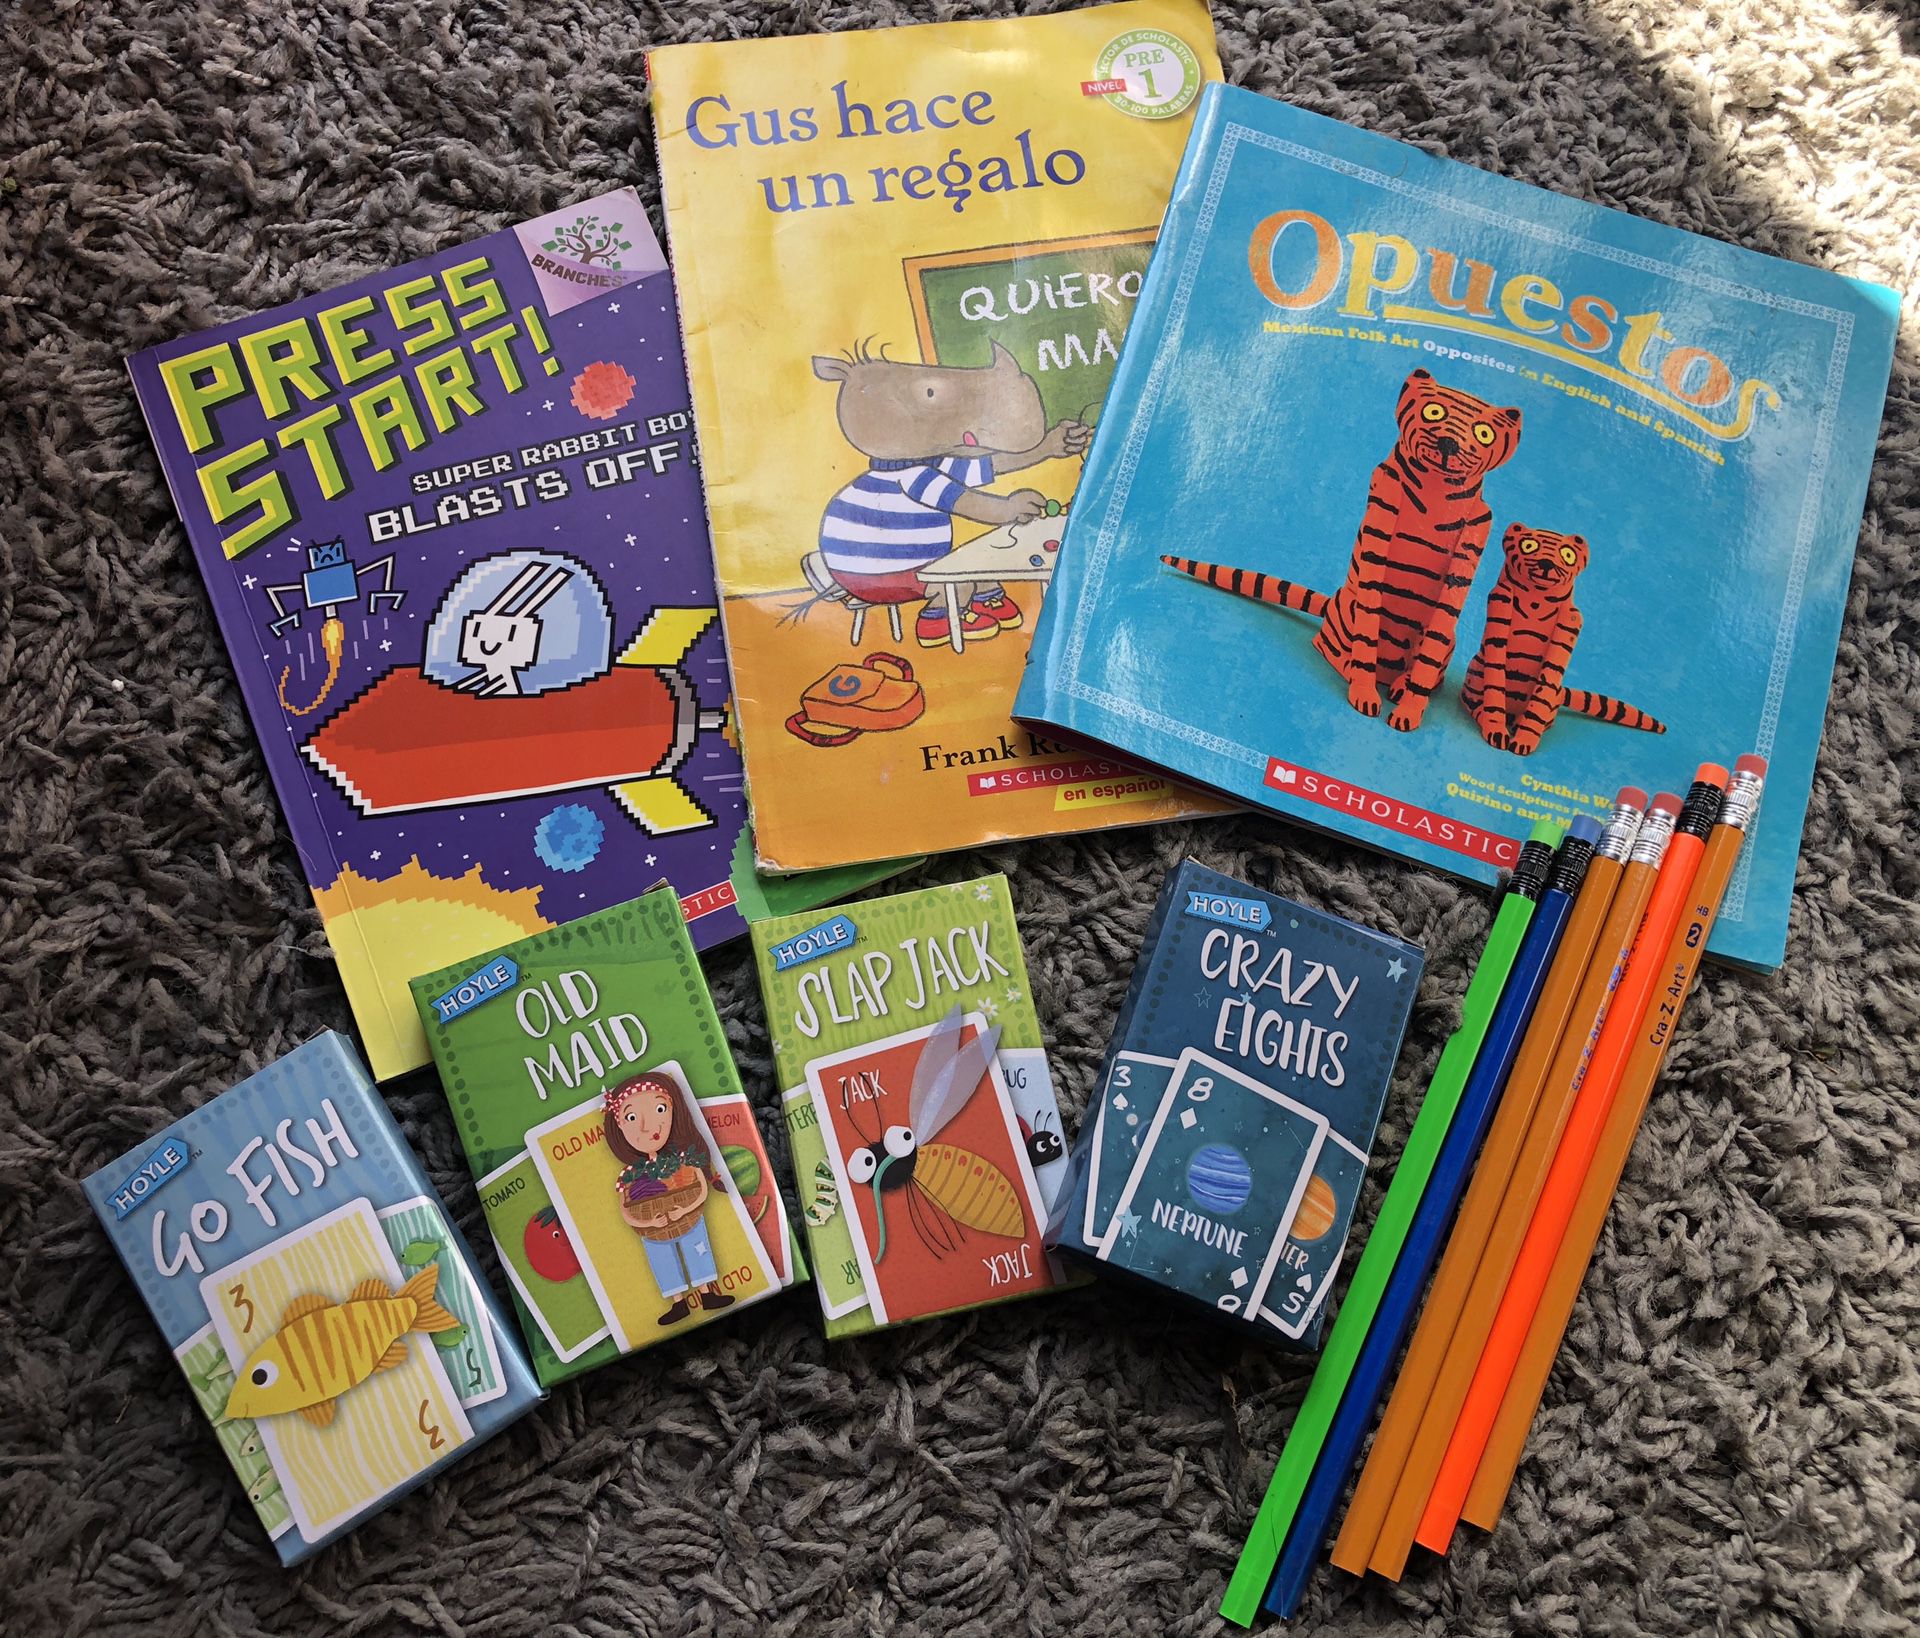 New Book, card games for kids to learn, and new pencils